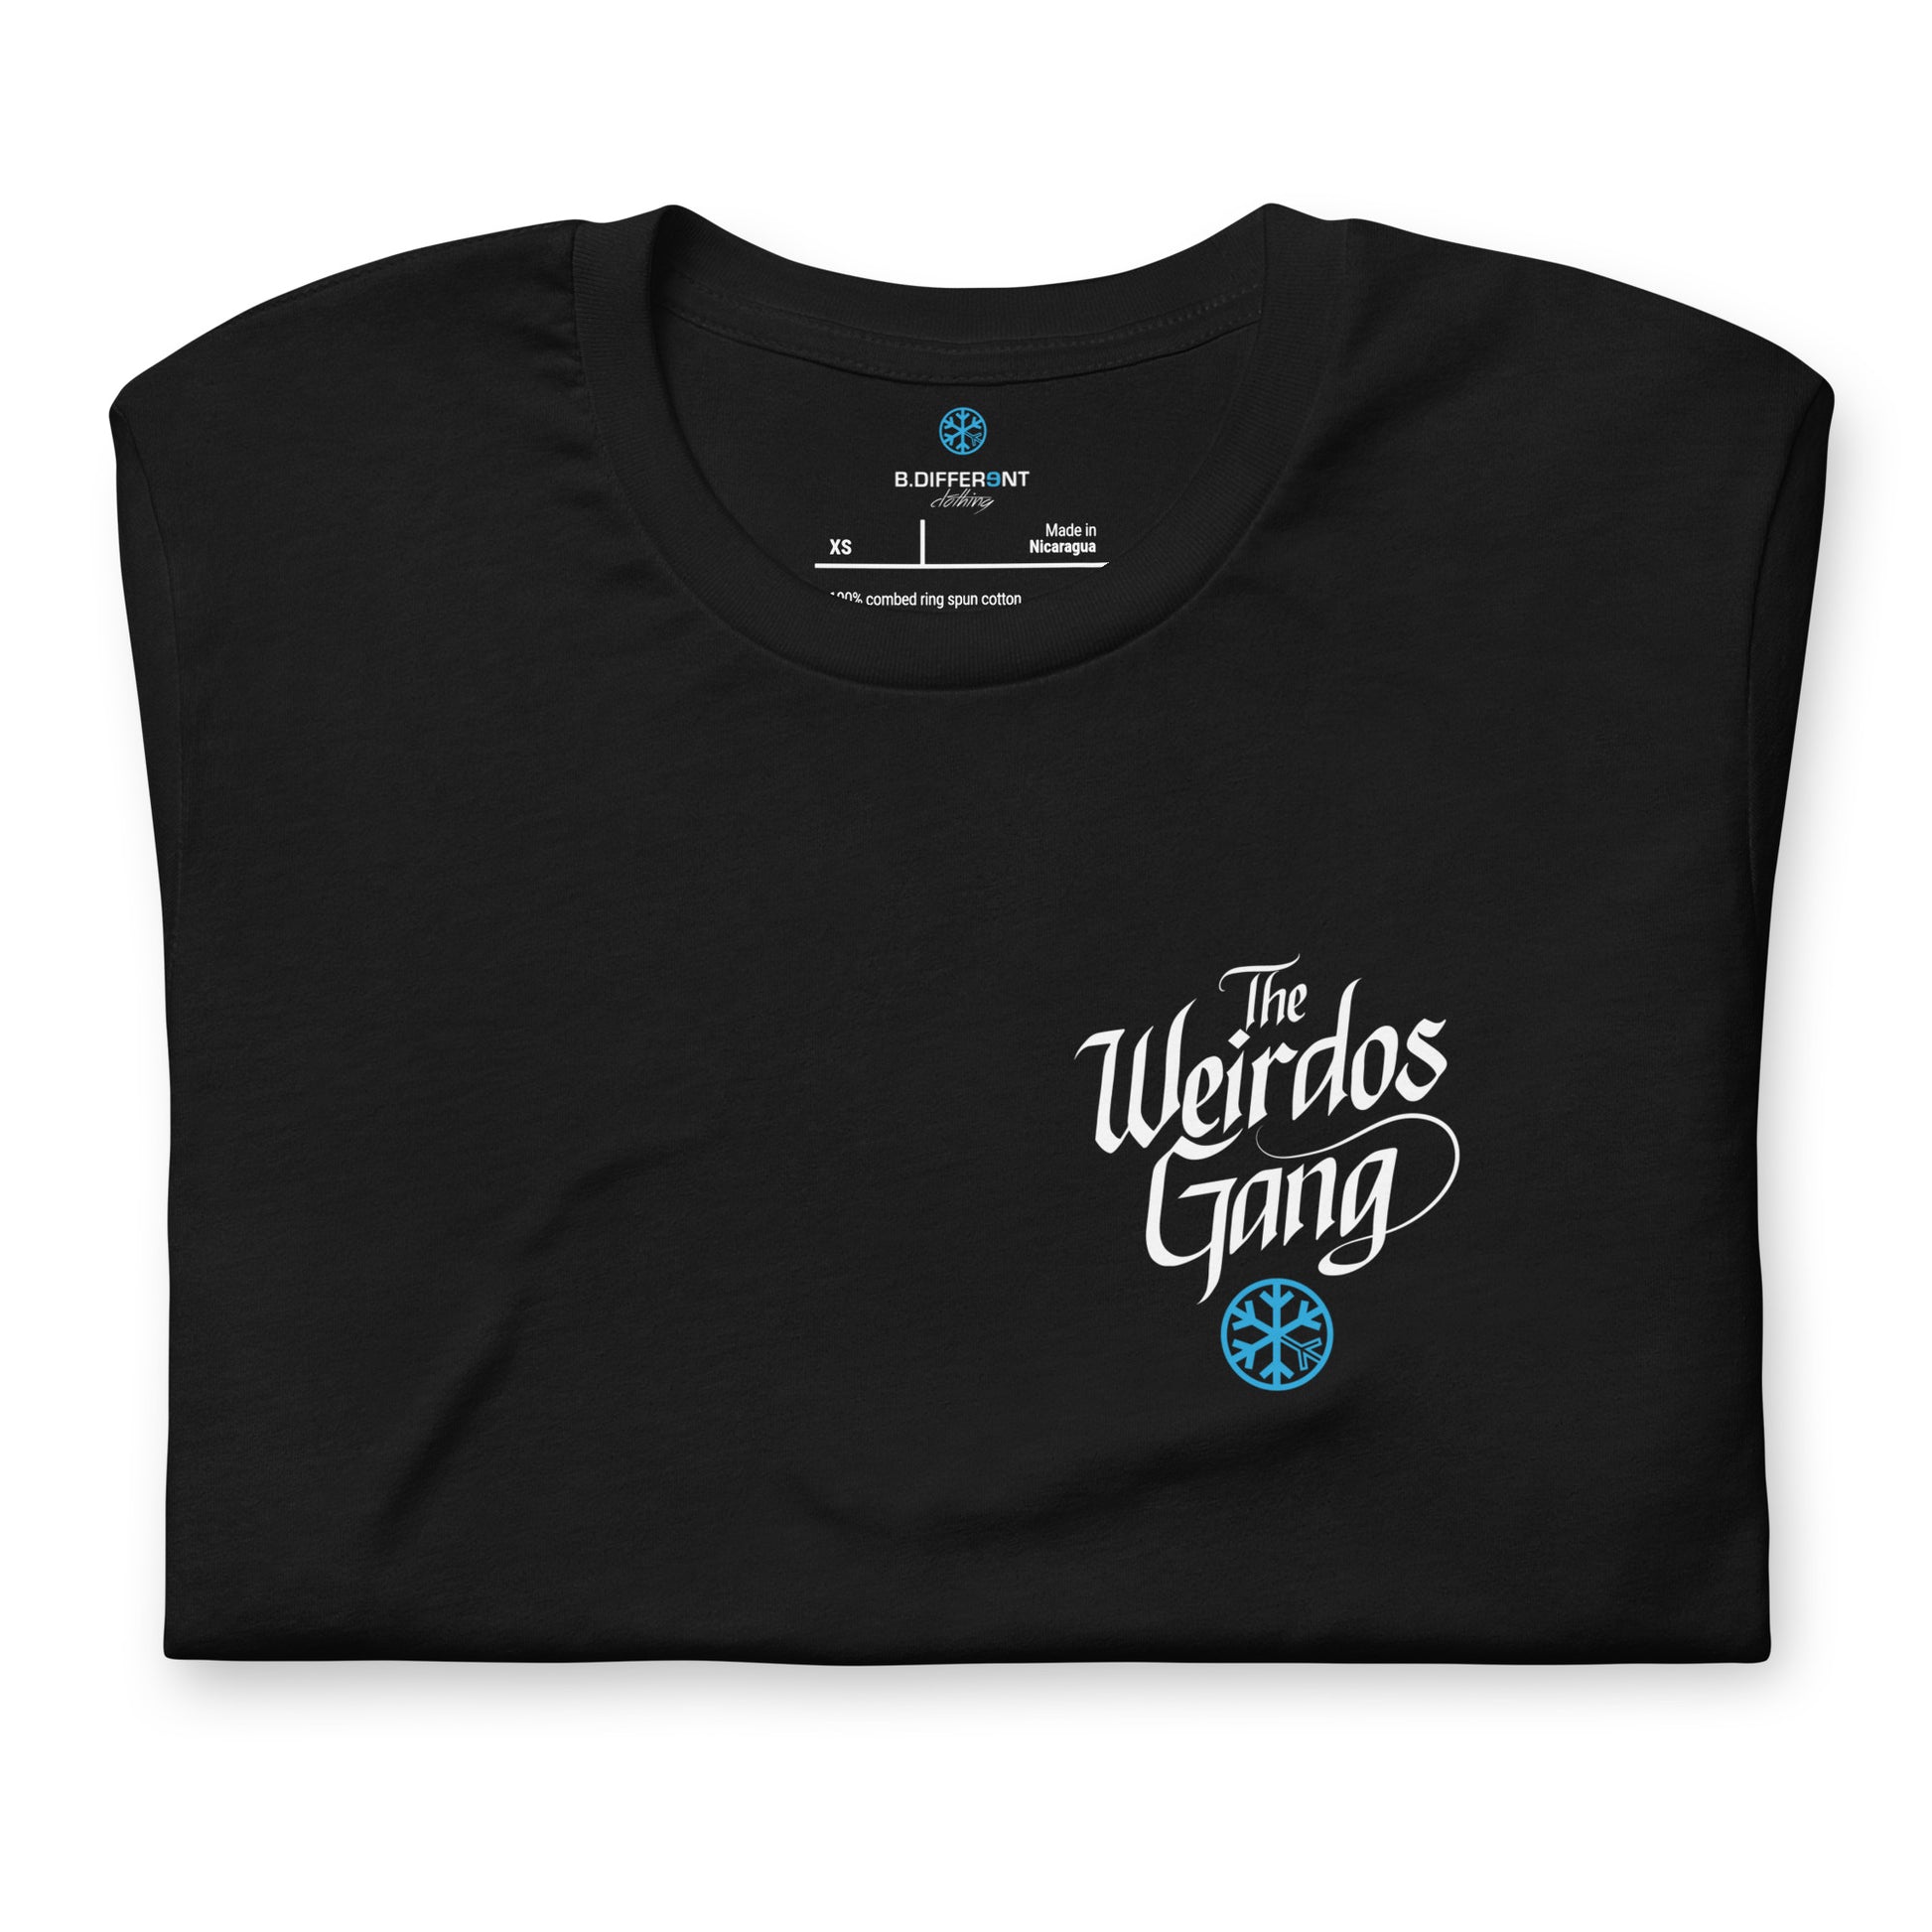 folded Weirdos gang lettering tee black by B.Different Clothing street art graffiti inspired brand for weirdos, outsiders, and misfits.